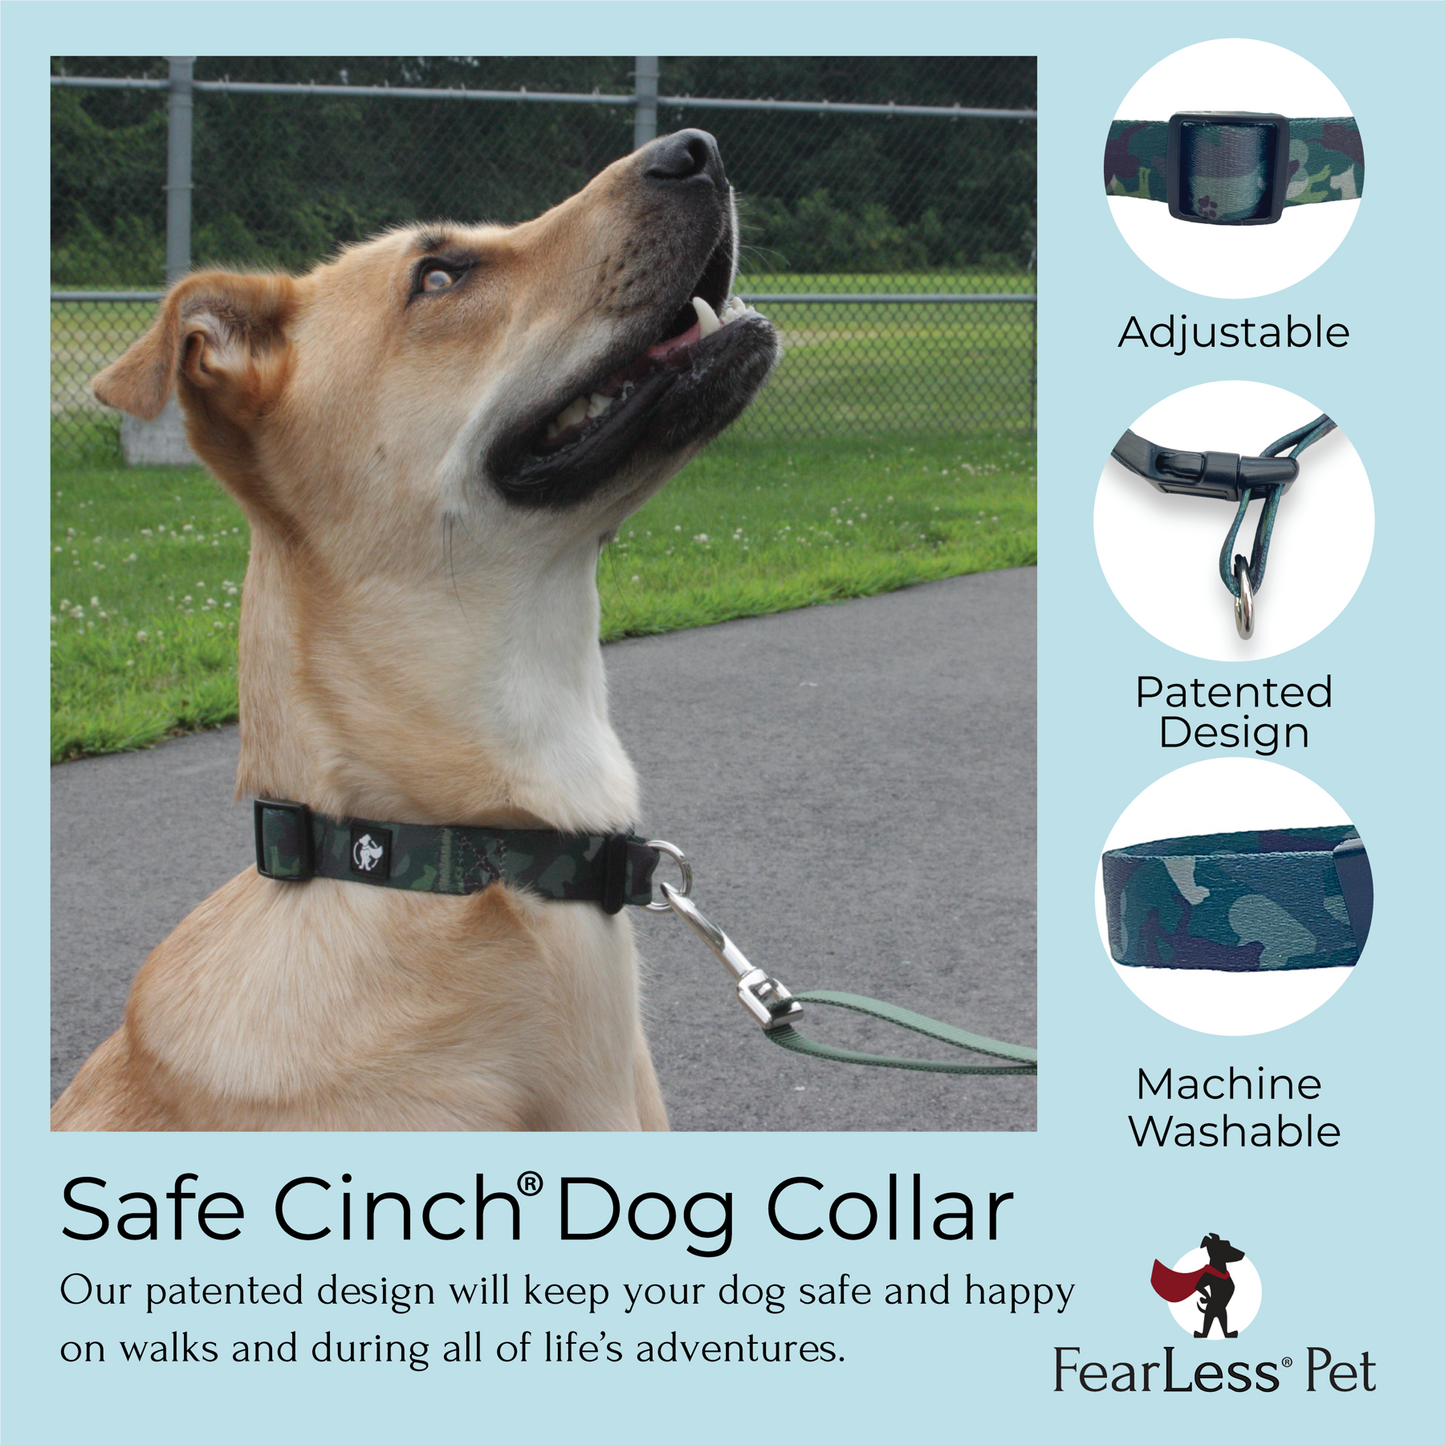 an infographic showing the features and benefits of a no escape safe cinch dog collar from fearless pet. Collar is shown on a blonde shepherd dog with bubbles indicating the collar is adjustable, patented and machine washable